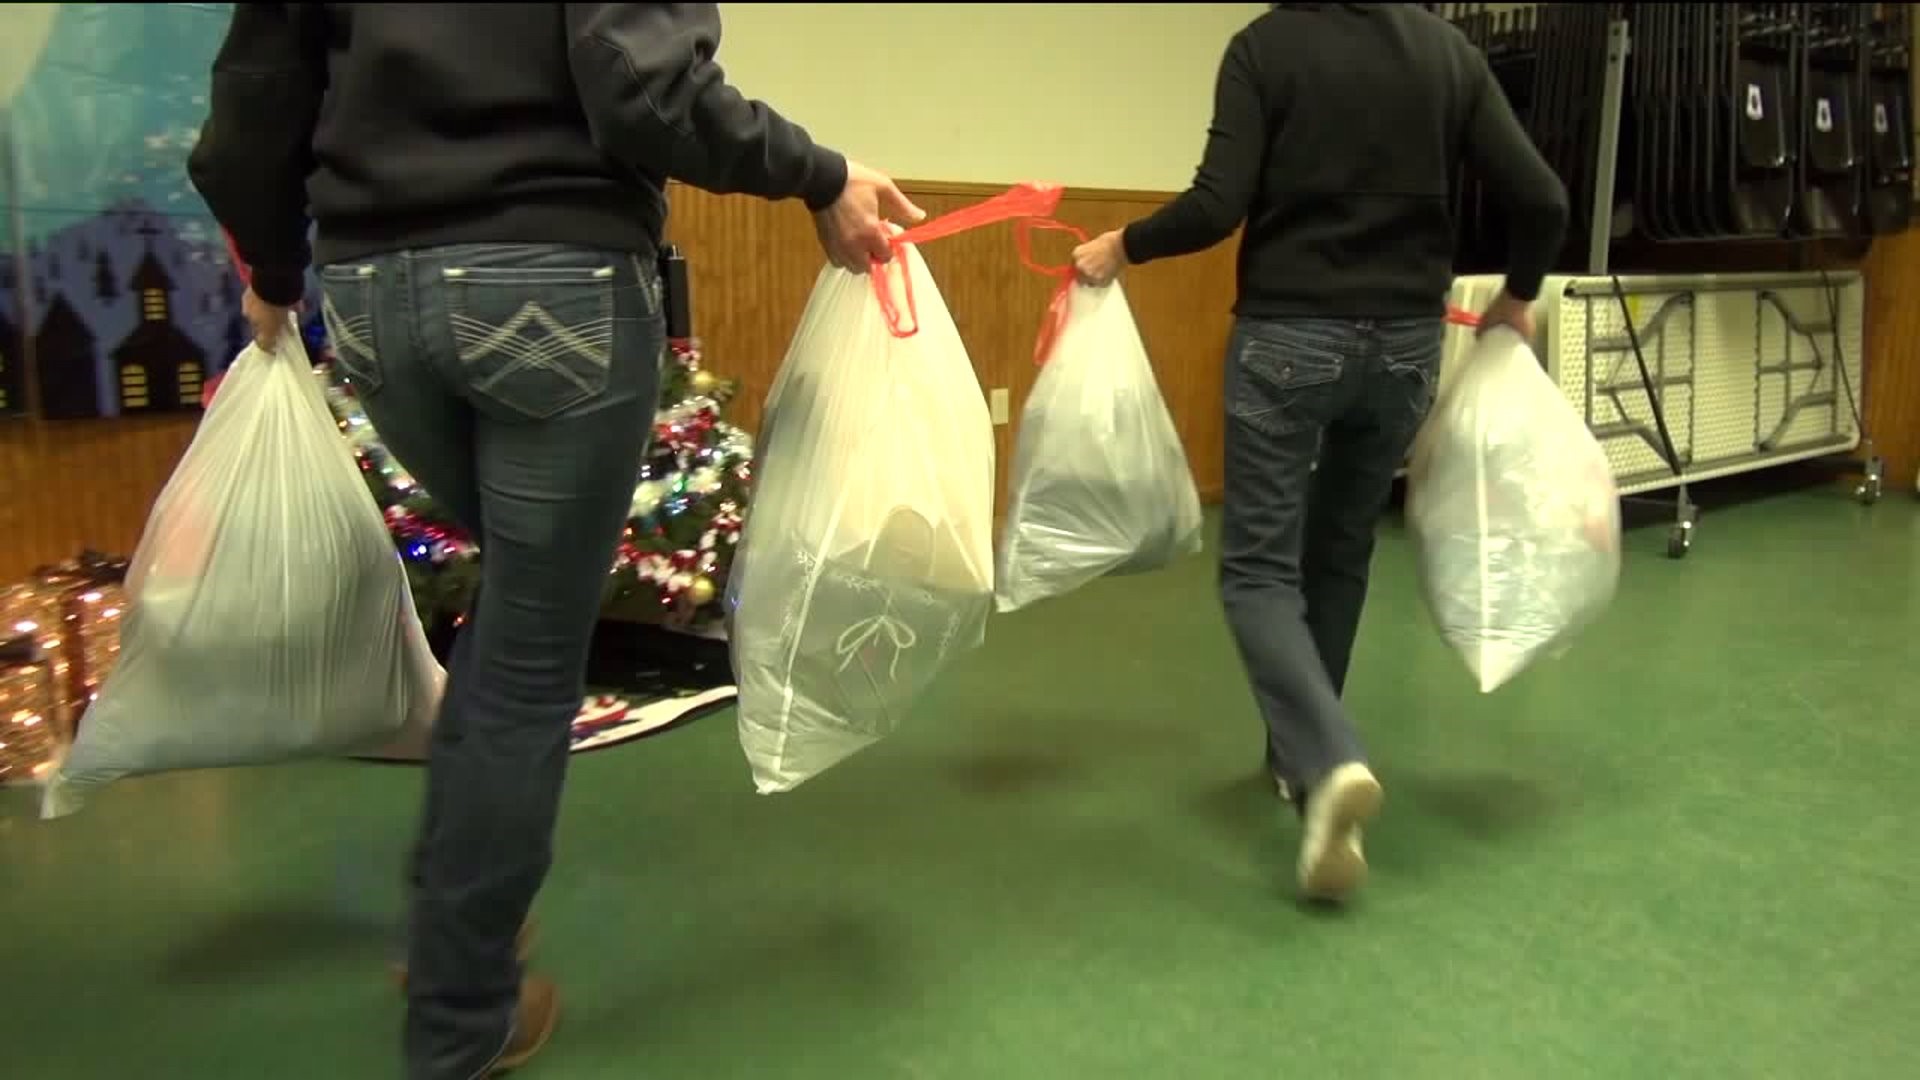 Clothing, Toy Collection for Christmas Day Fire Victims in Luzerne County